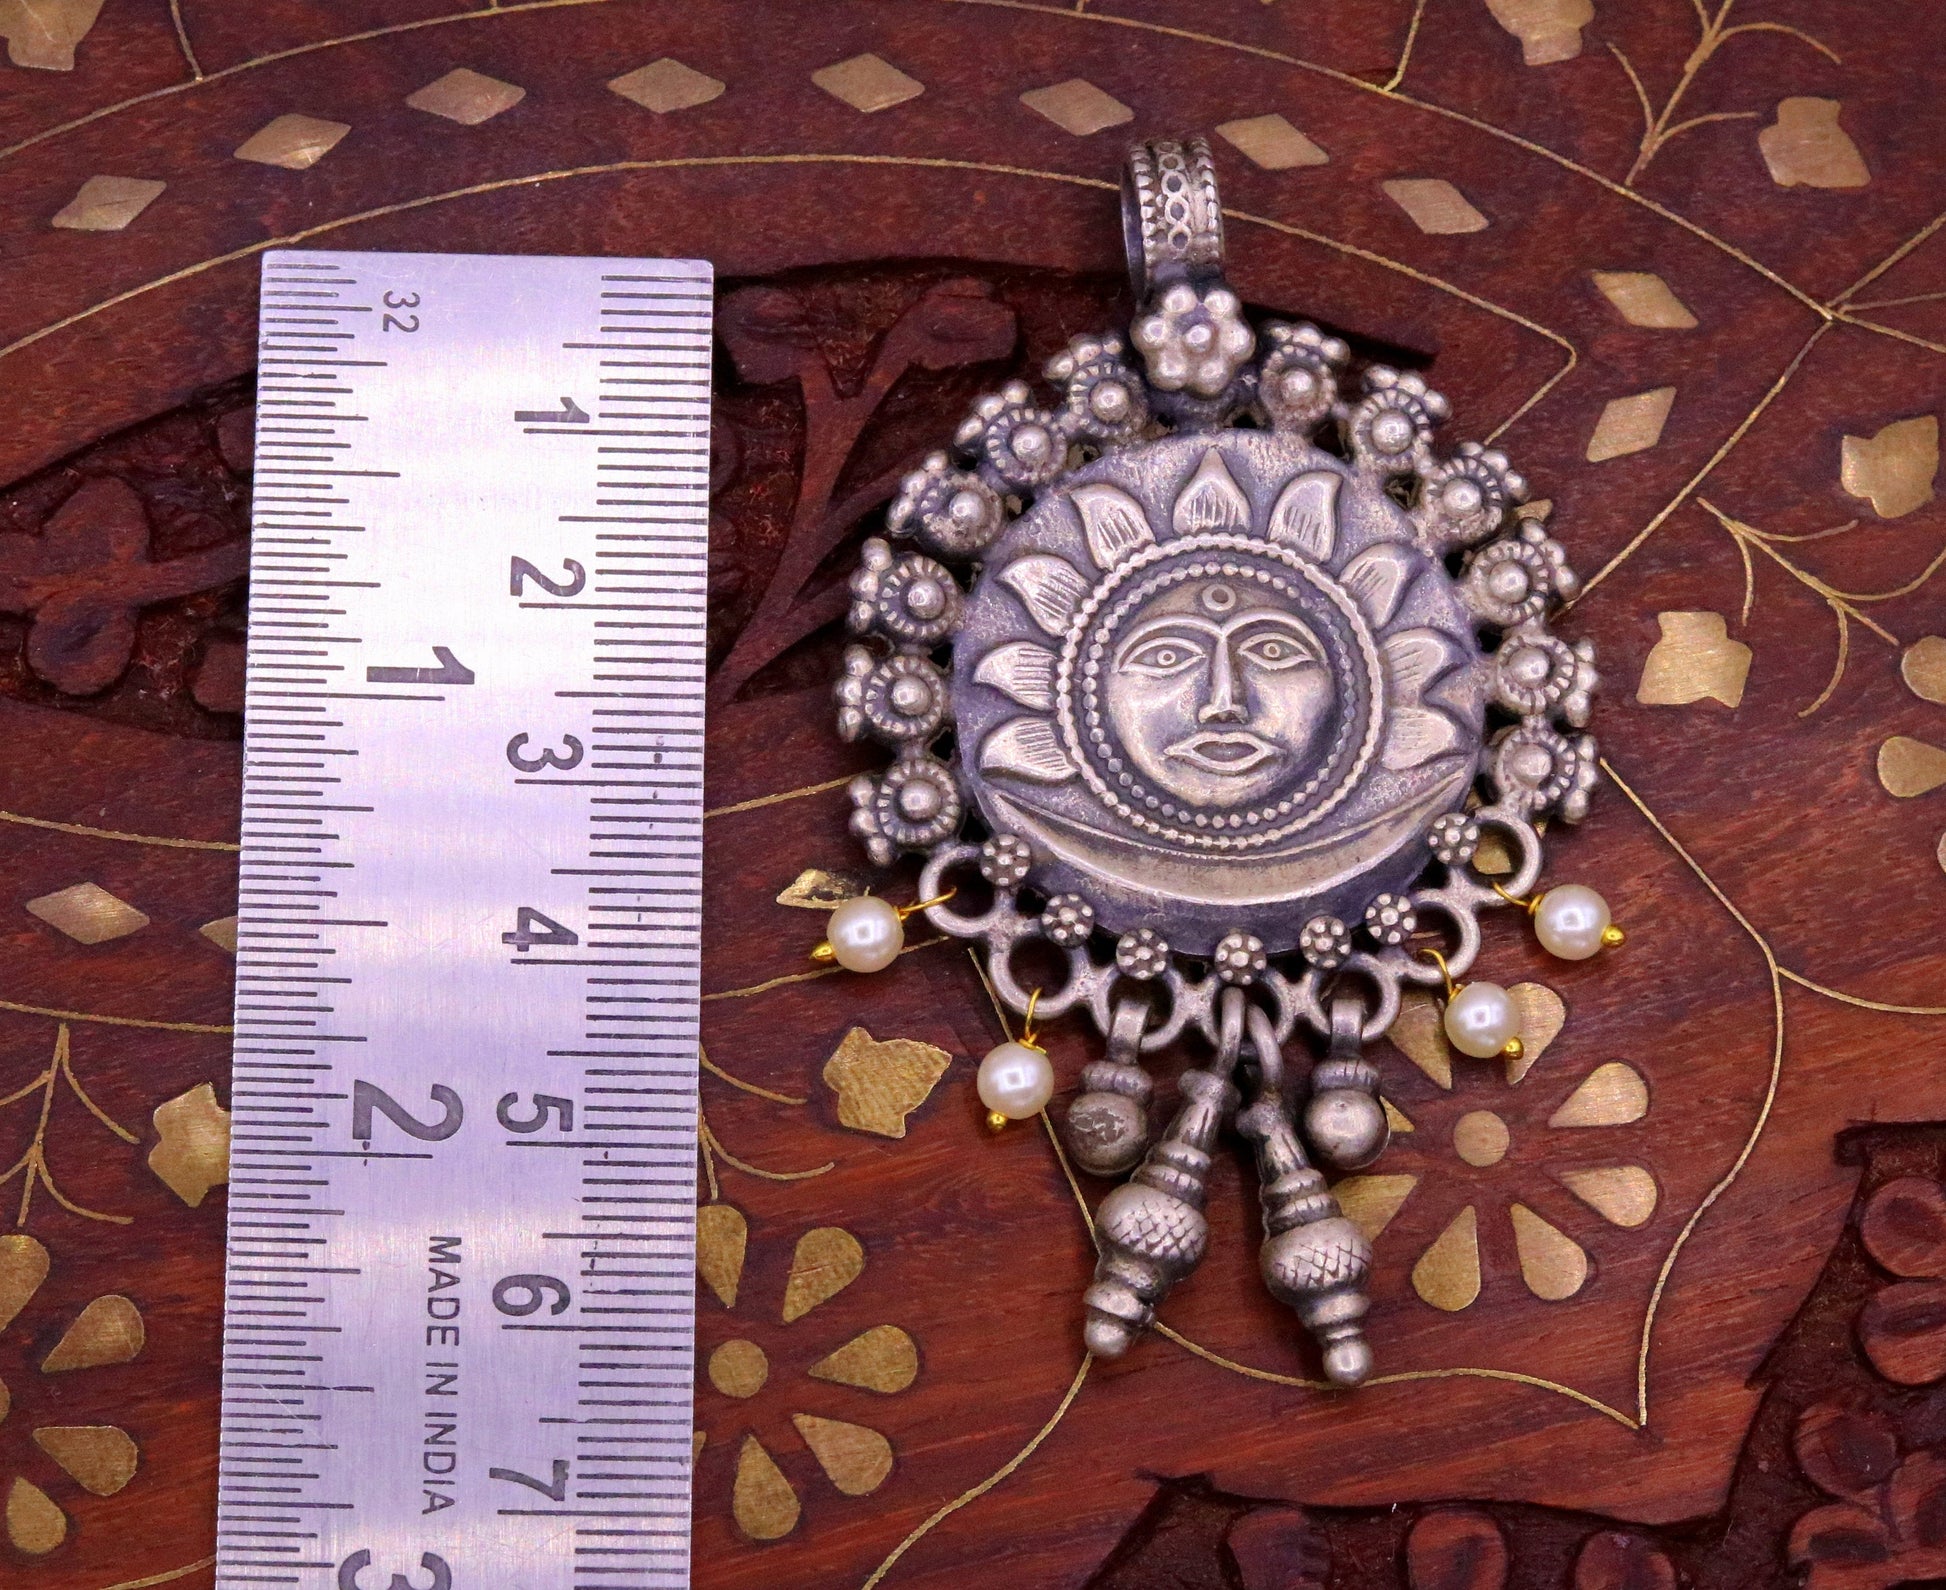 925 sterling silver handmade excellent sun face pendant with hangings, excellent tribal belly dance jewelry from Rajasthan India nsp288 - TRIBAL ORNAMENTS